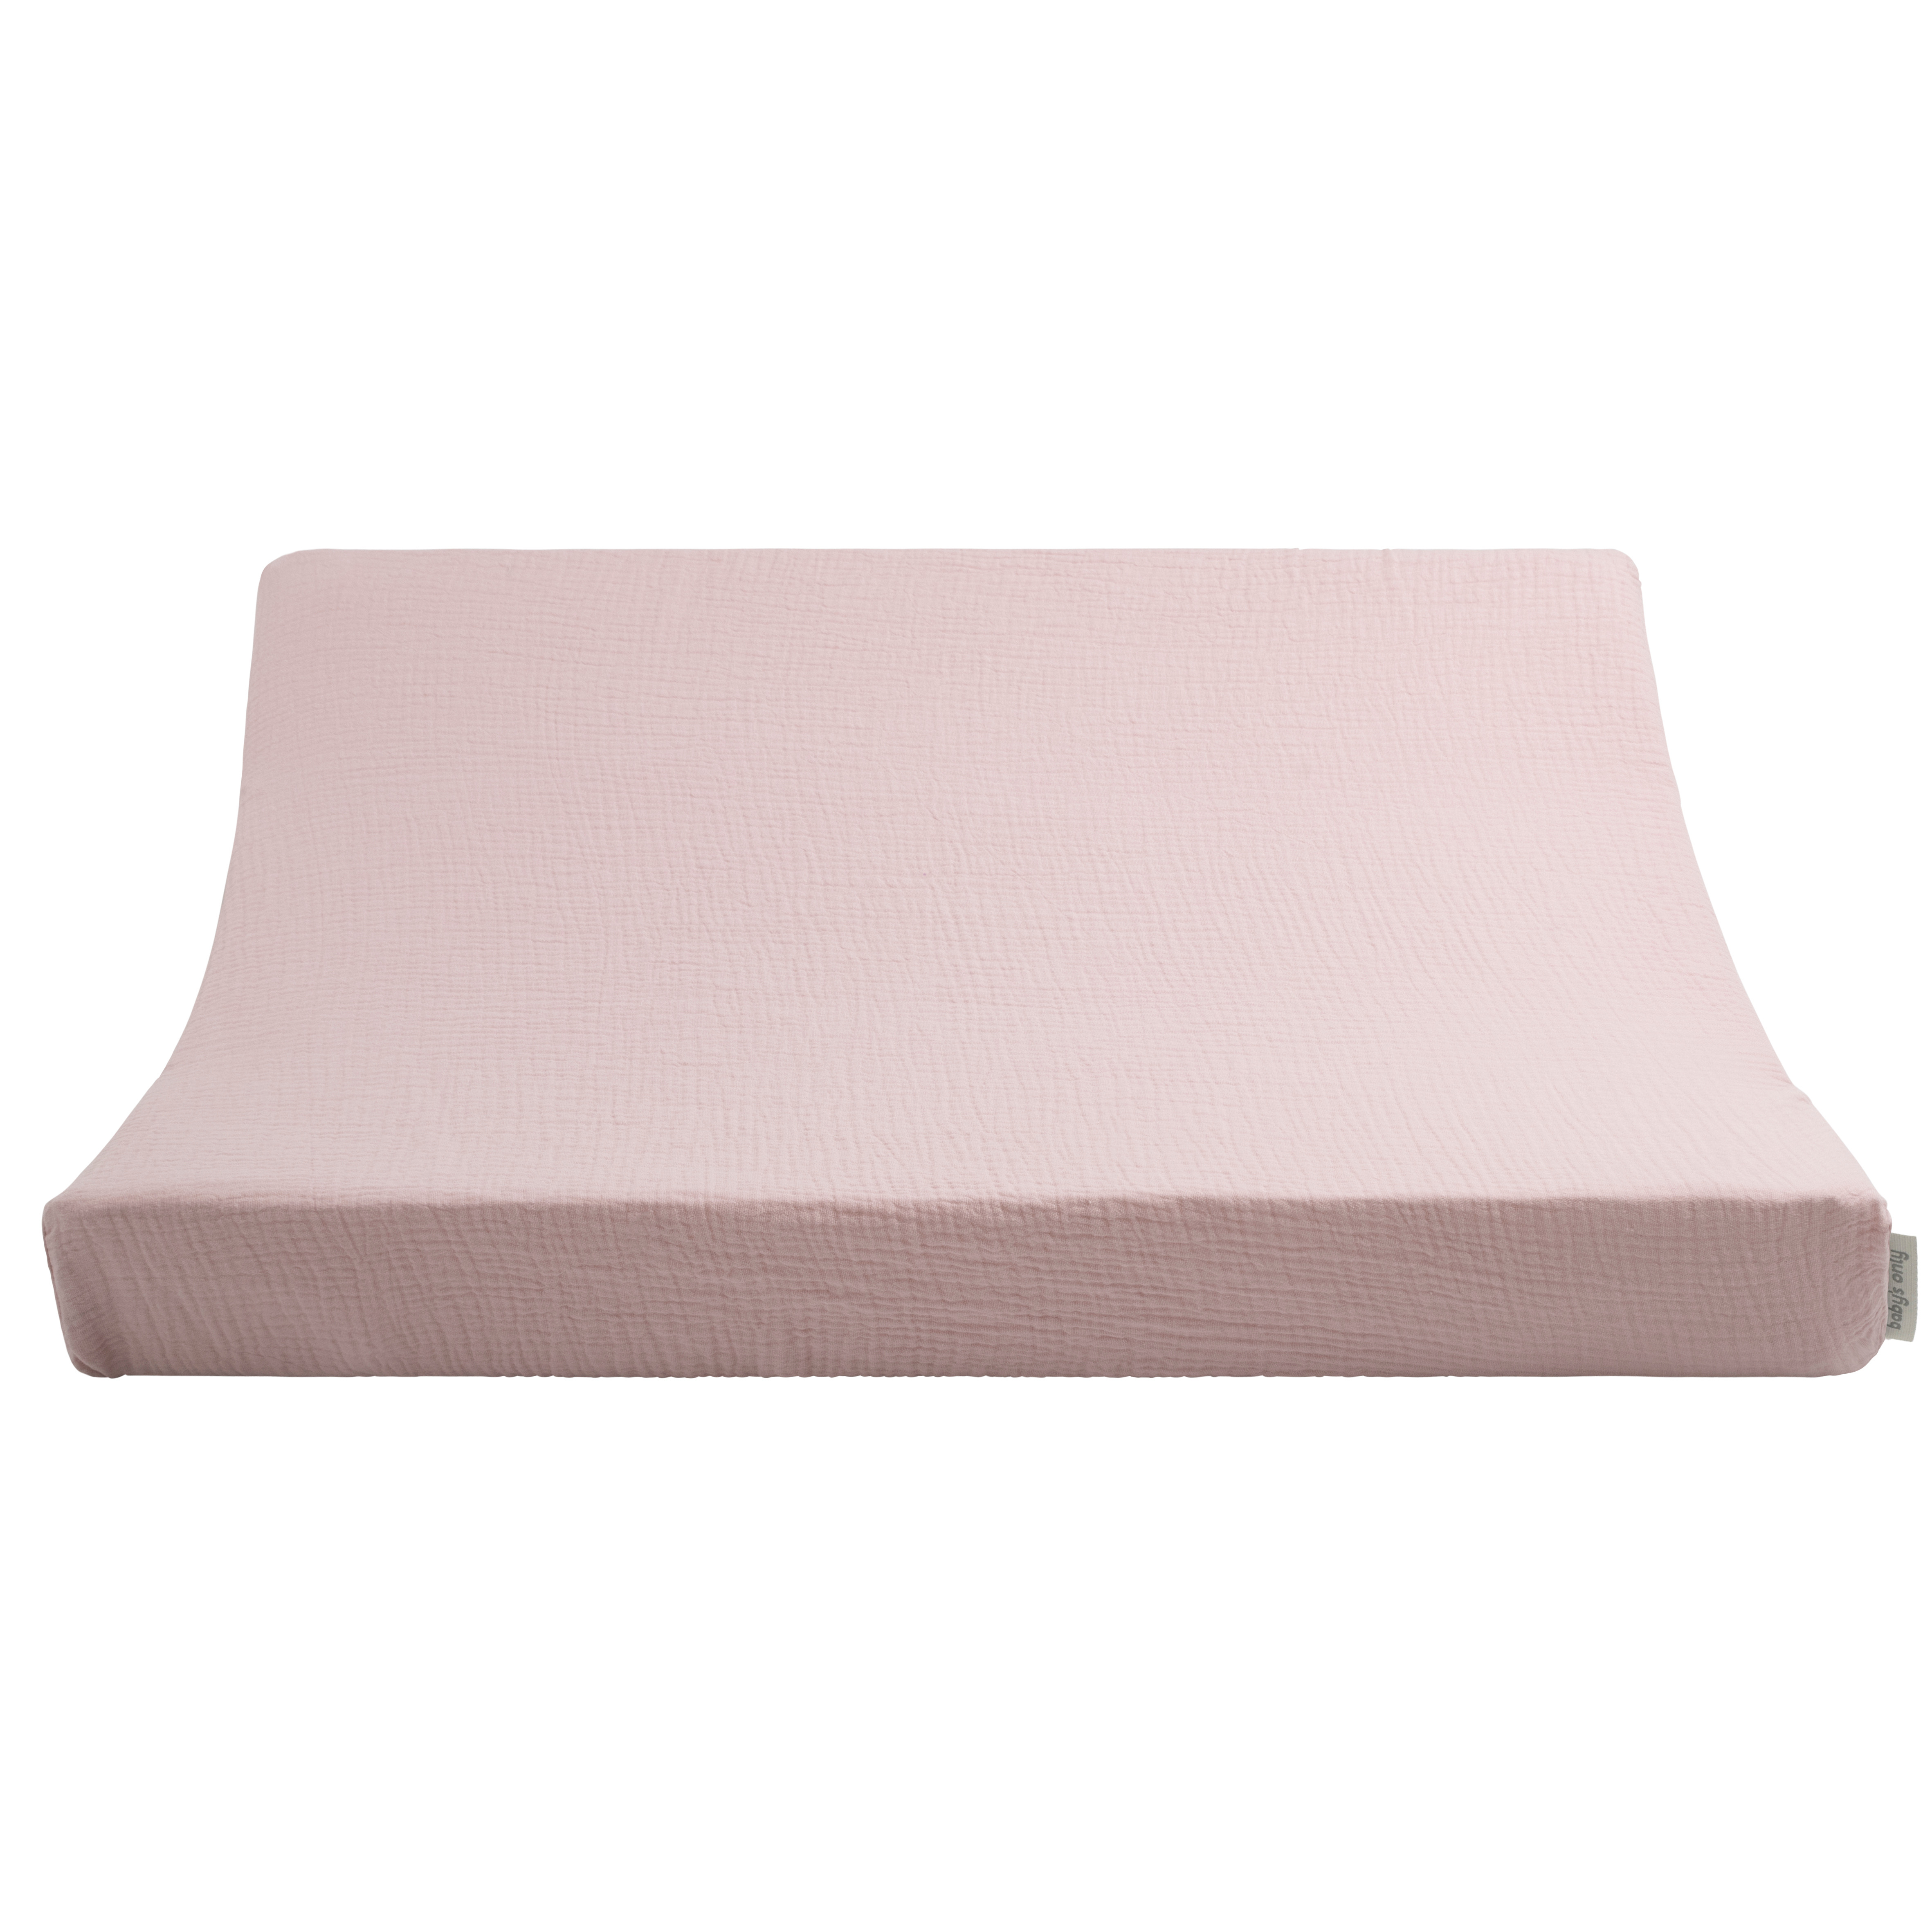 Changing pad cover Fresh ECO old pink - 45x70